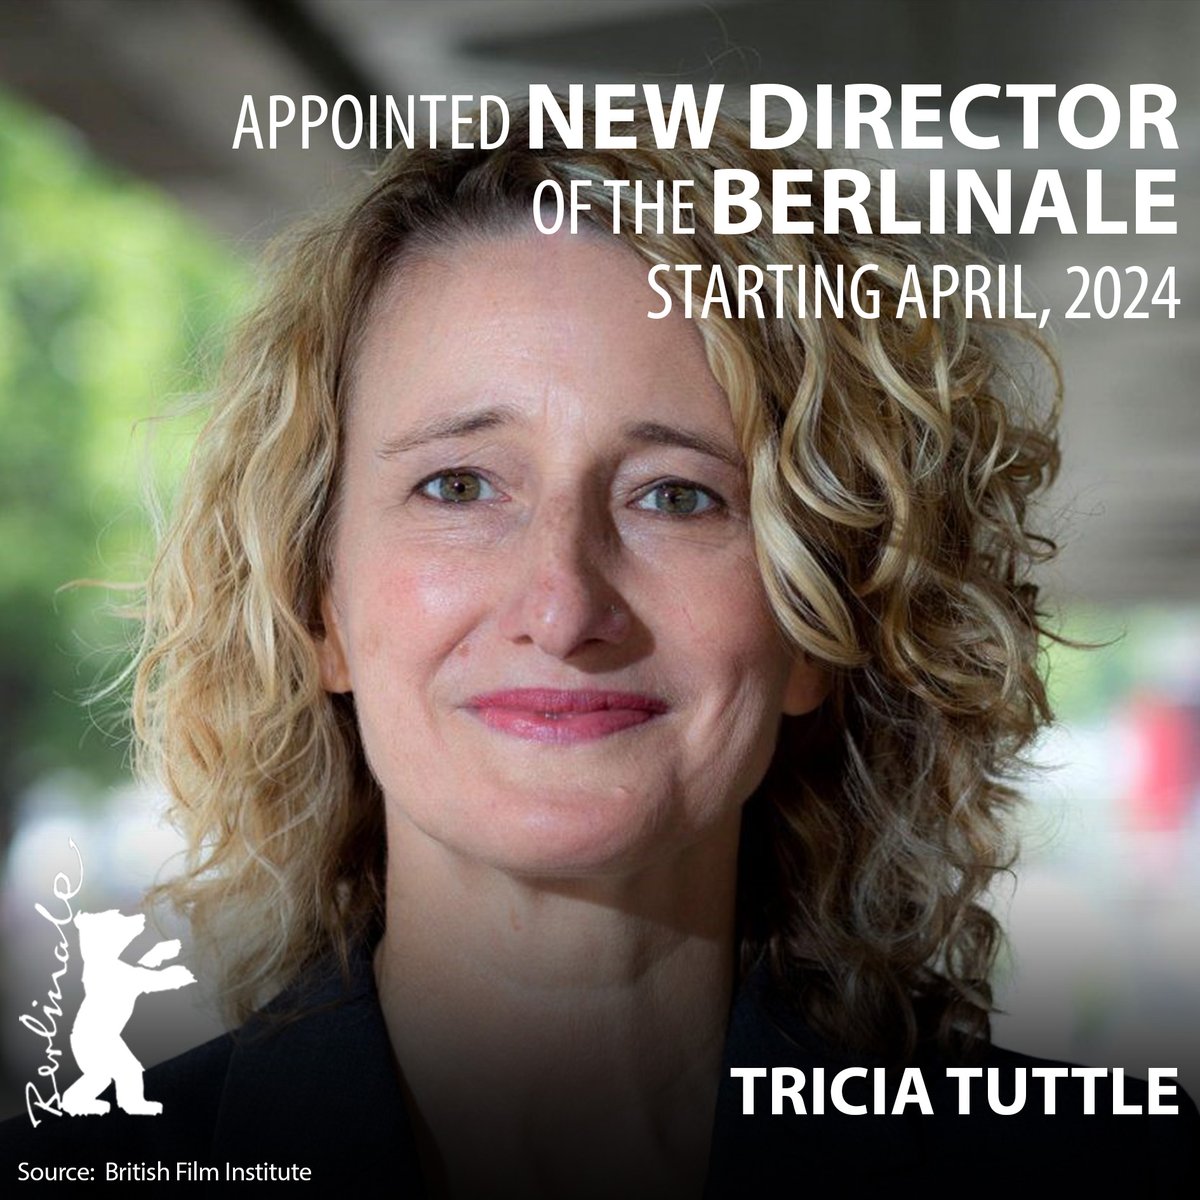 Chaired by Federal Government Commissioner for Culture and the Media, Claudia Roth, the KBB's Board of Supervisors approved the selection committee’s proposal to appoint Tricia Tuttle as director of the Berlinale starting in April, 2024. More info: bit.ly/NewBerlinaleDi…